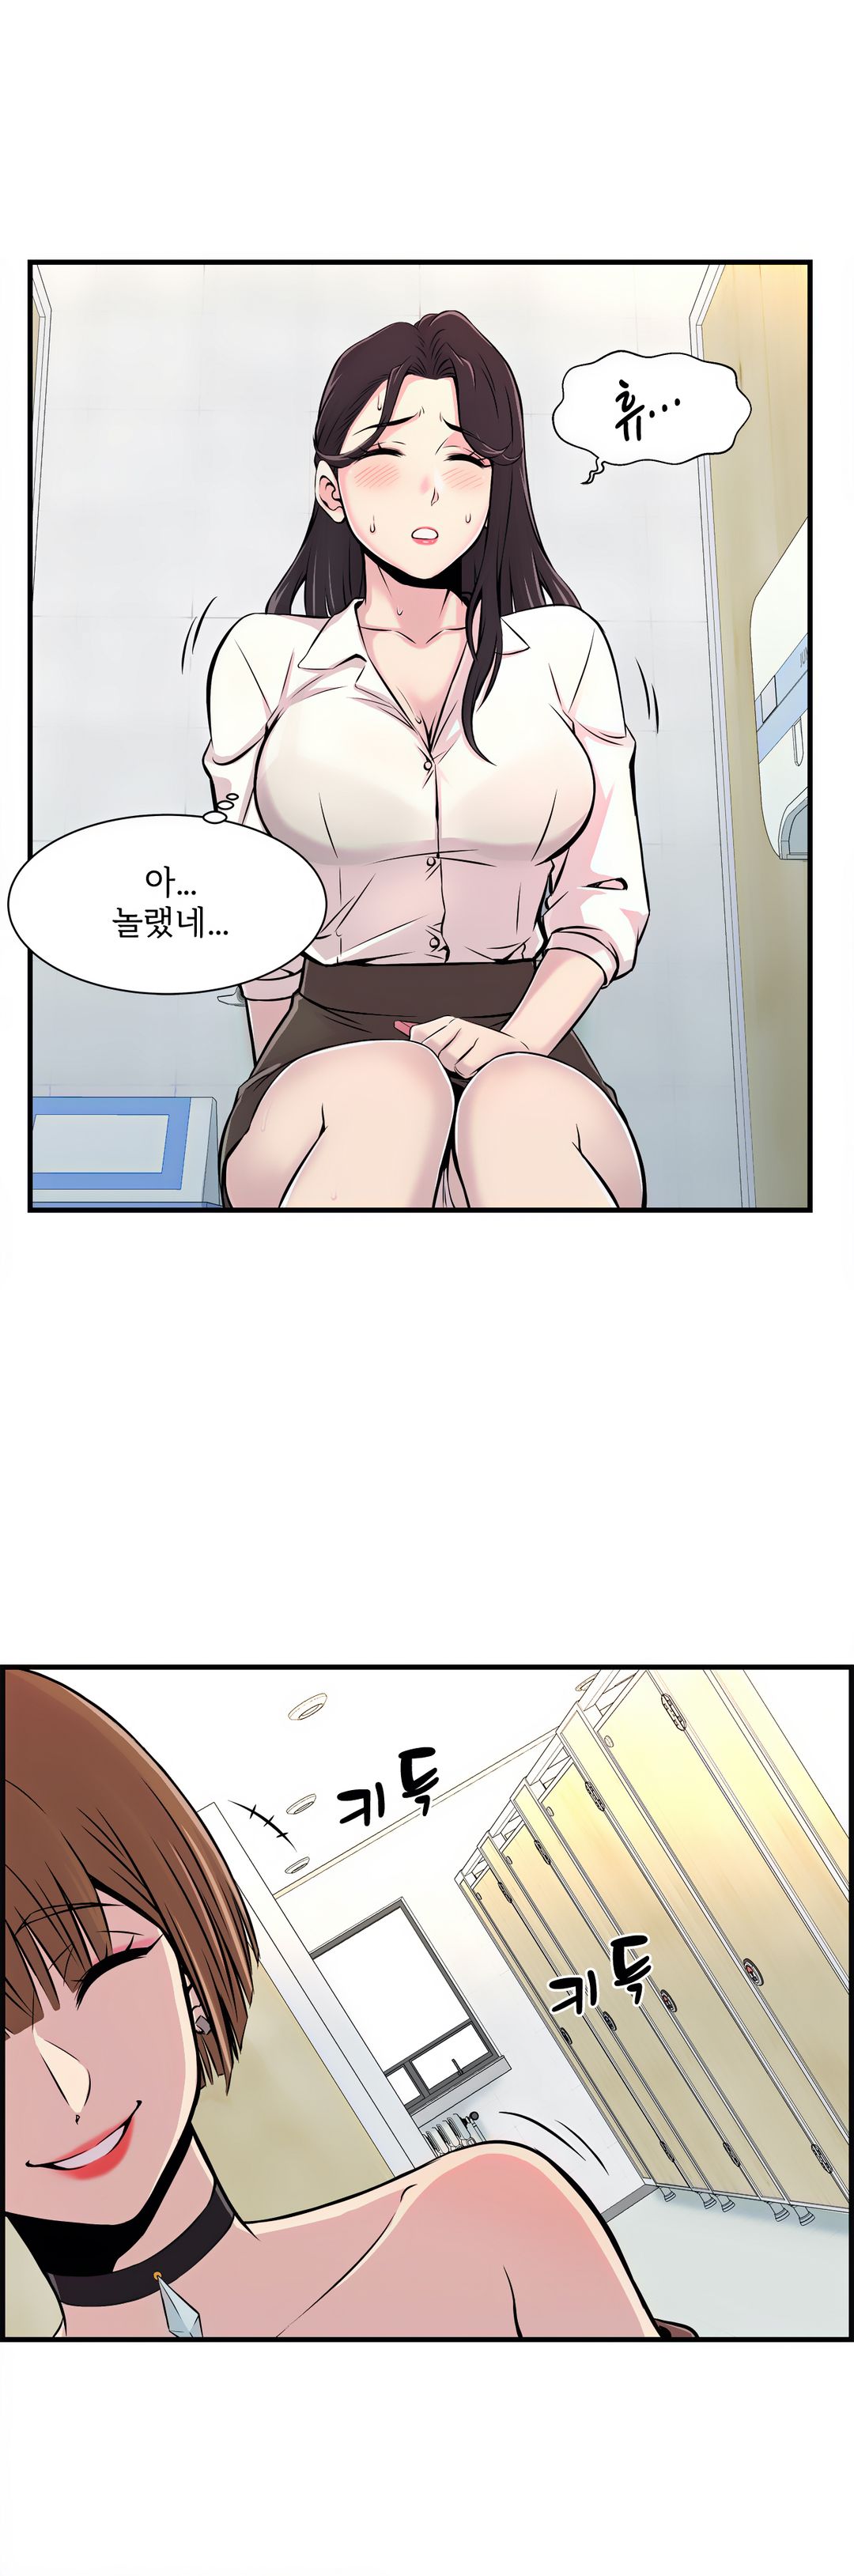 Cram School Scandal Raw - Chapter 4 Page 8